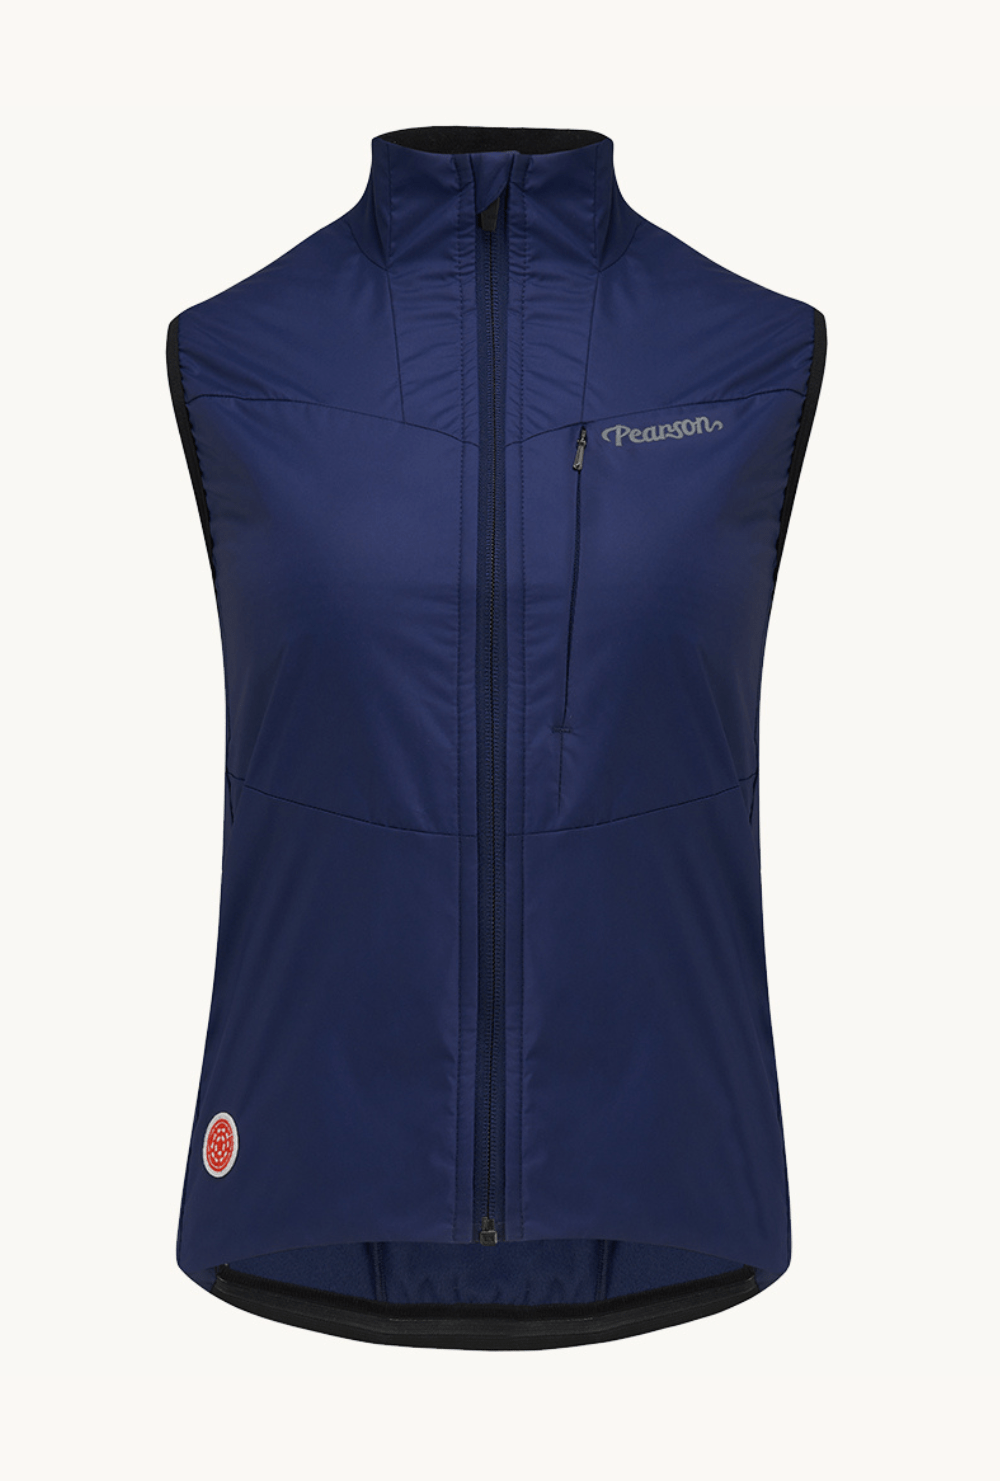 Pearson 1860  Feel The Benefits - Womens Road Insulated Gilet Blue Ink  X-large / Blue Ink